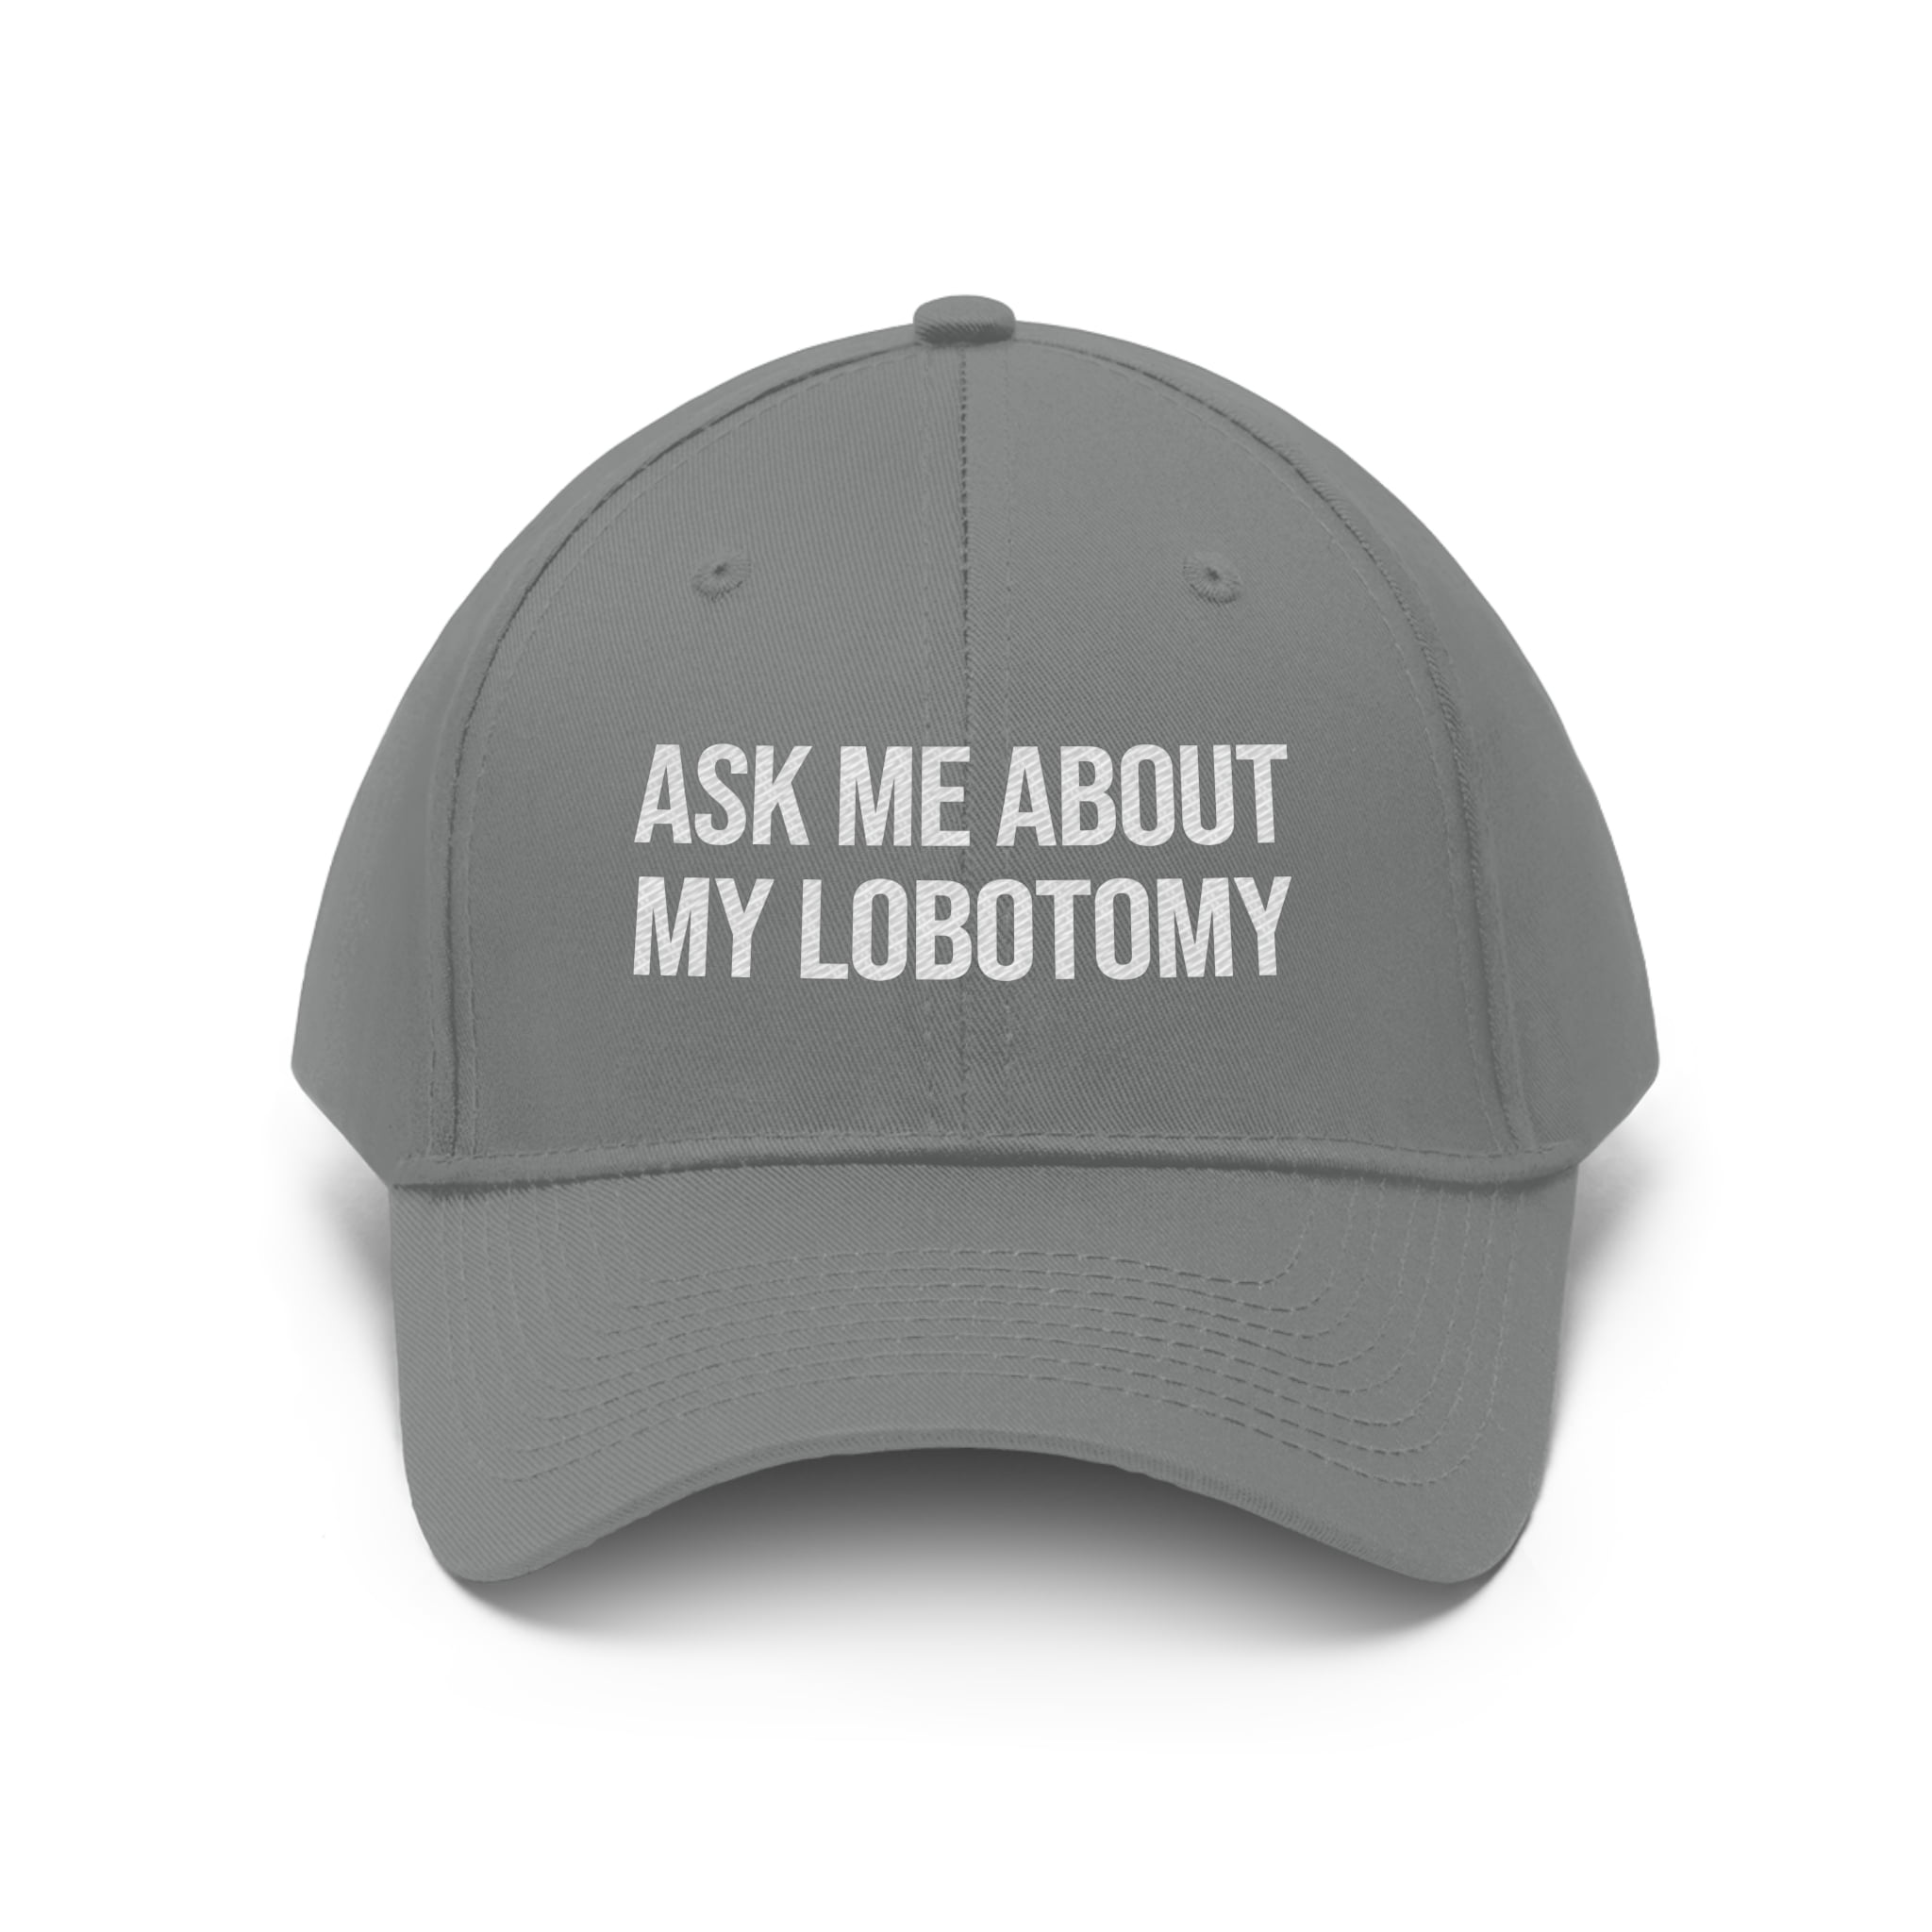 Ask Me About My Lobotomy Funny Baseball Hat for Men Women With